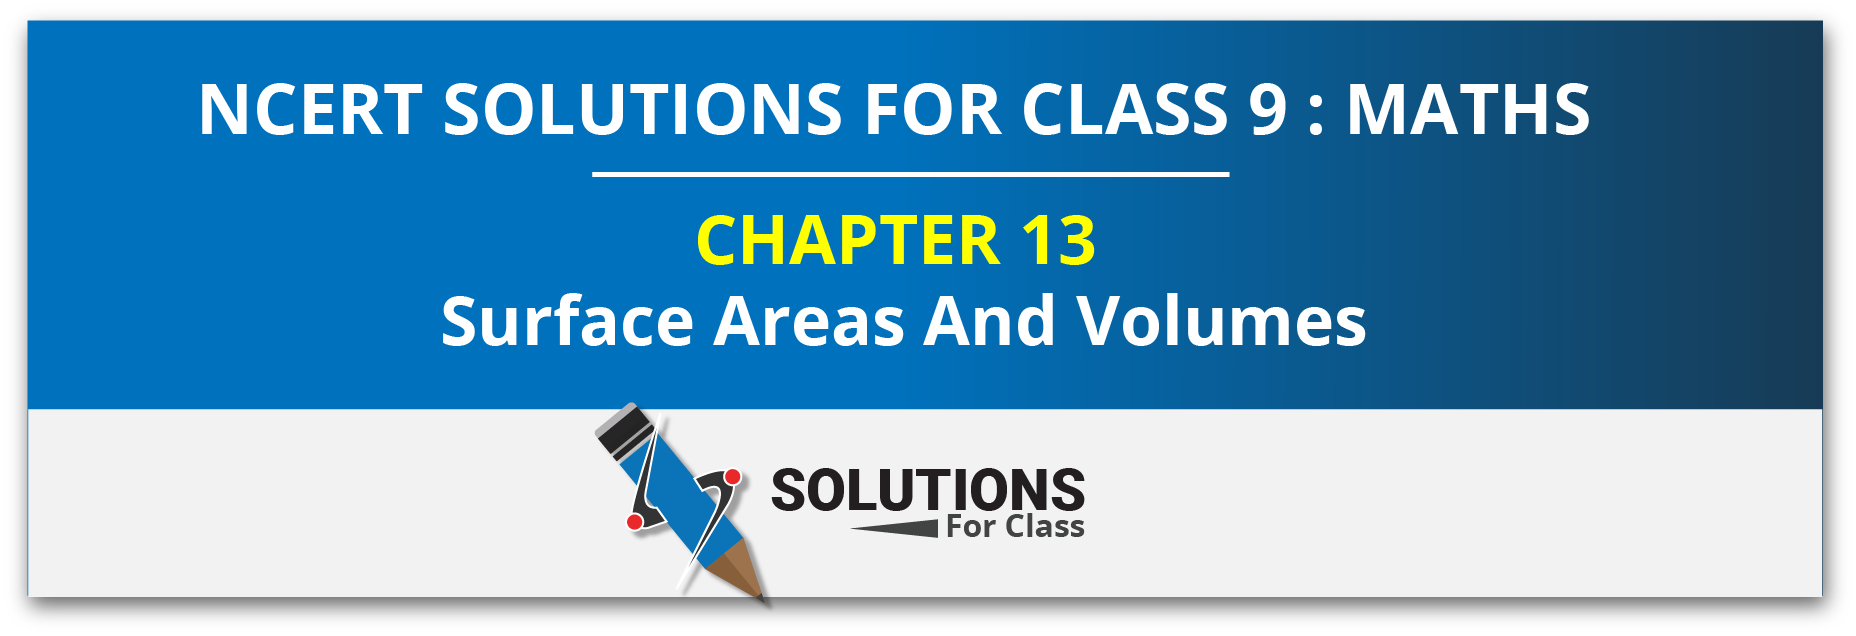 NCERT Solution For Class 9, Maths, Chapter 13, Surface Areas And Volumes